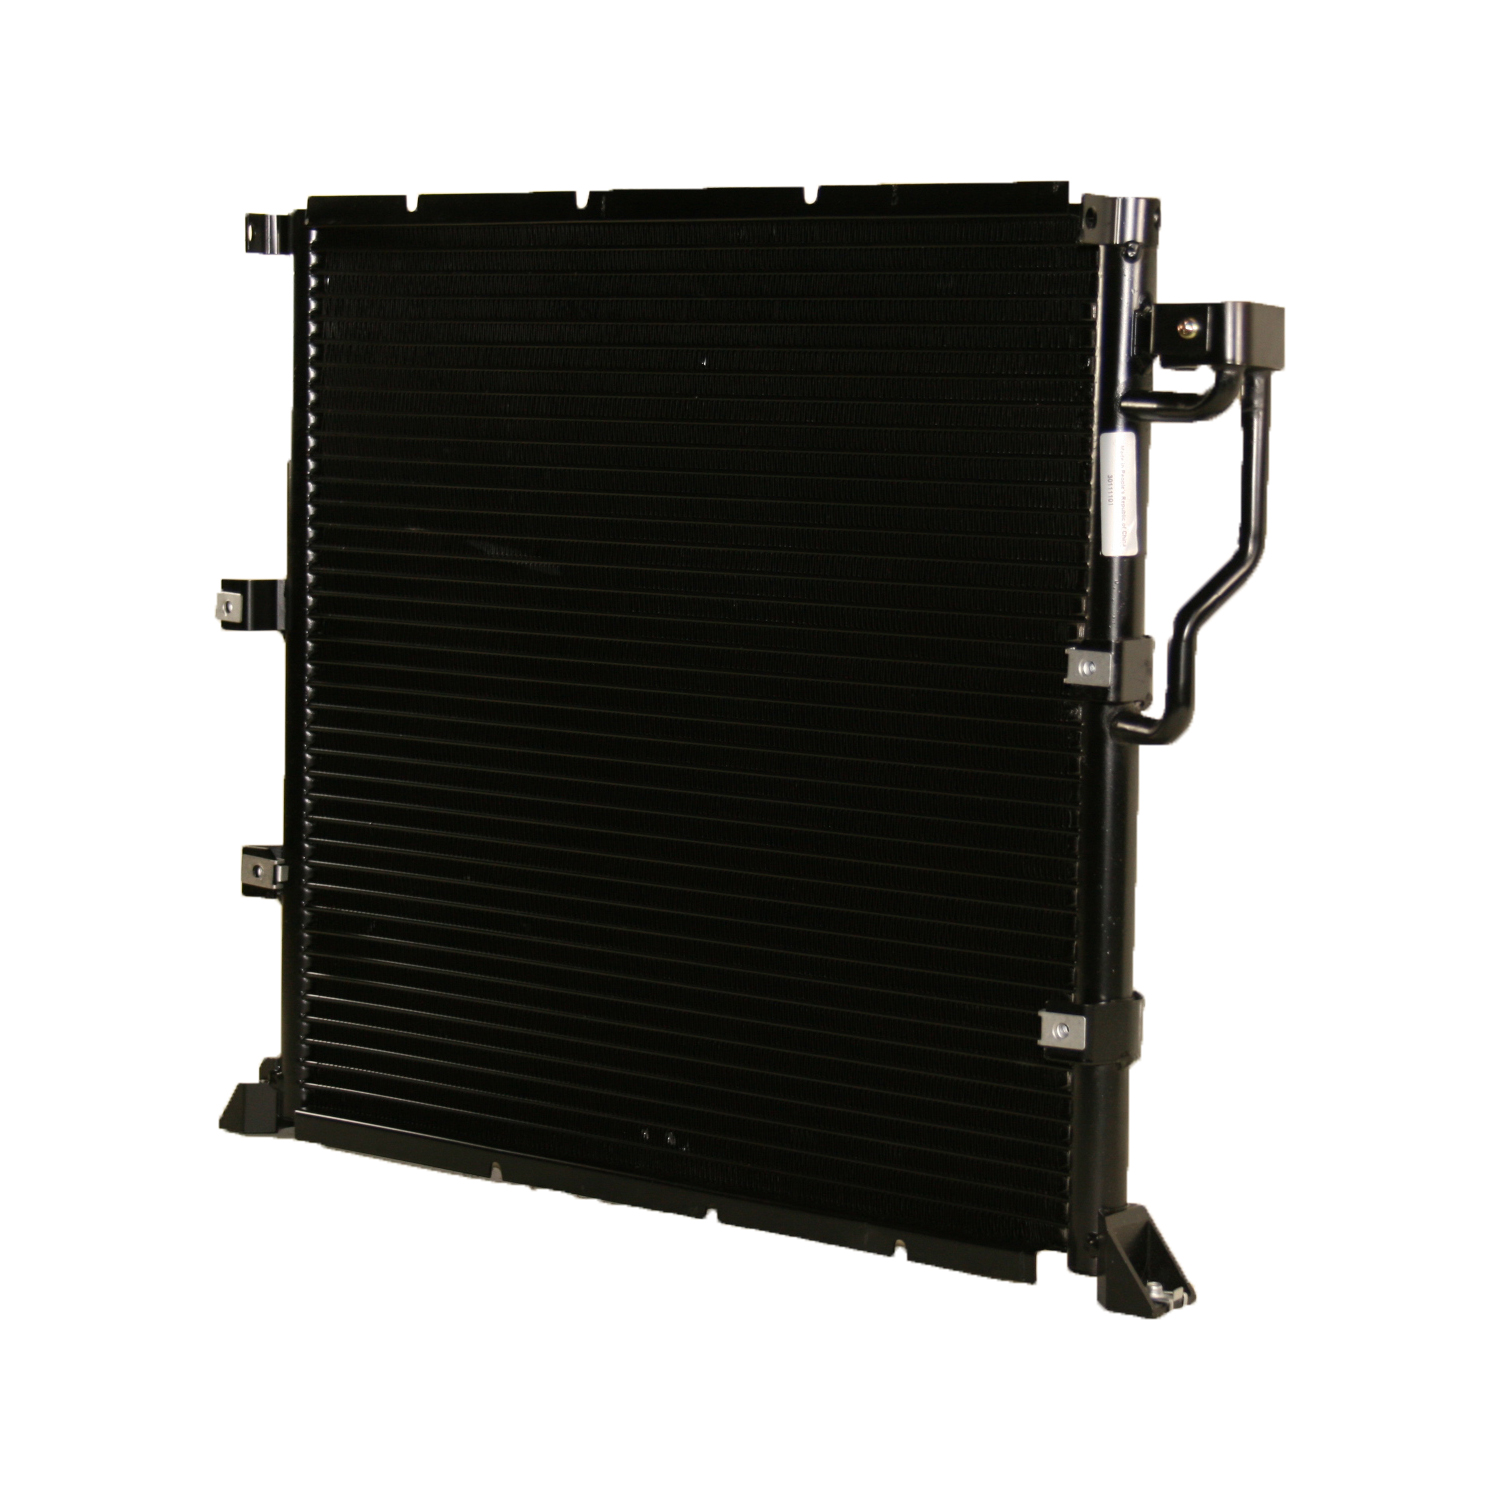 TCW Condenser 44-4473 New Product Image field_60b6a13a6e67c